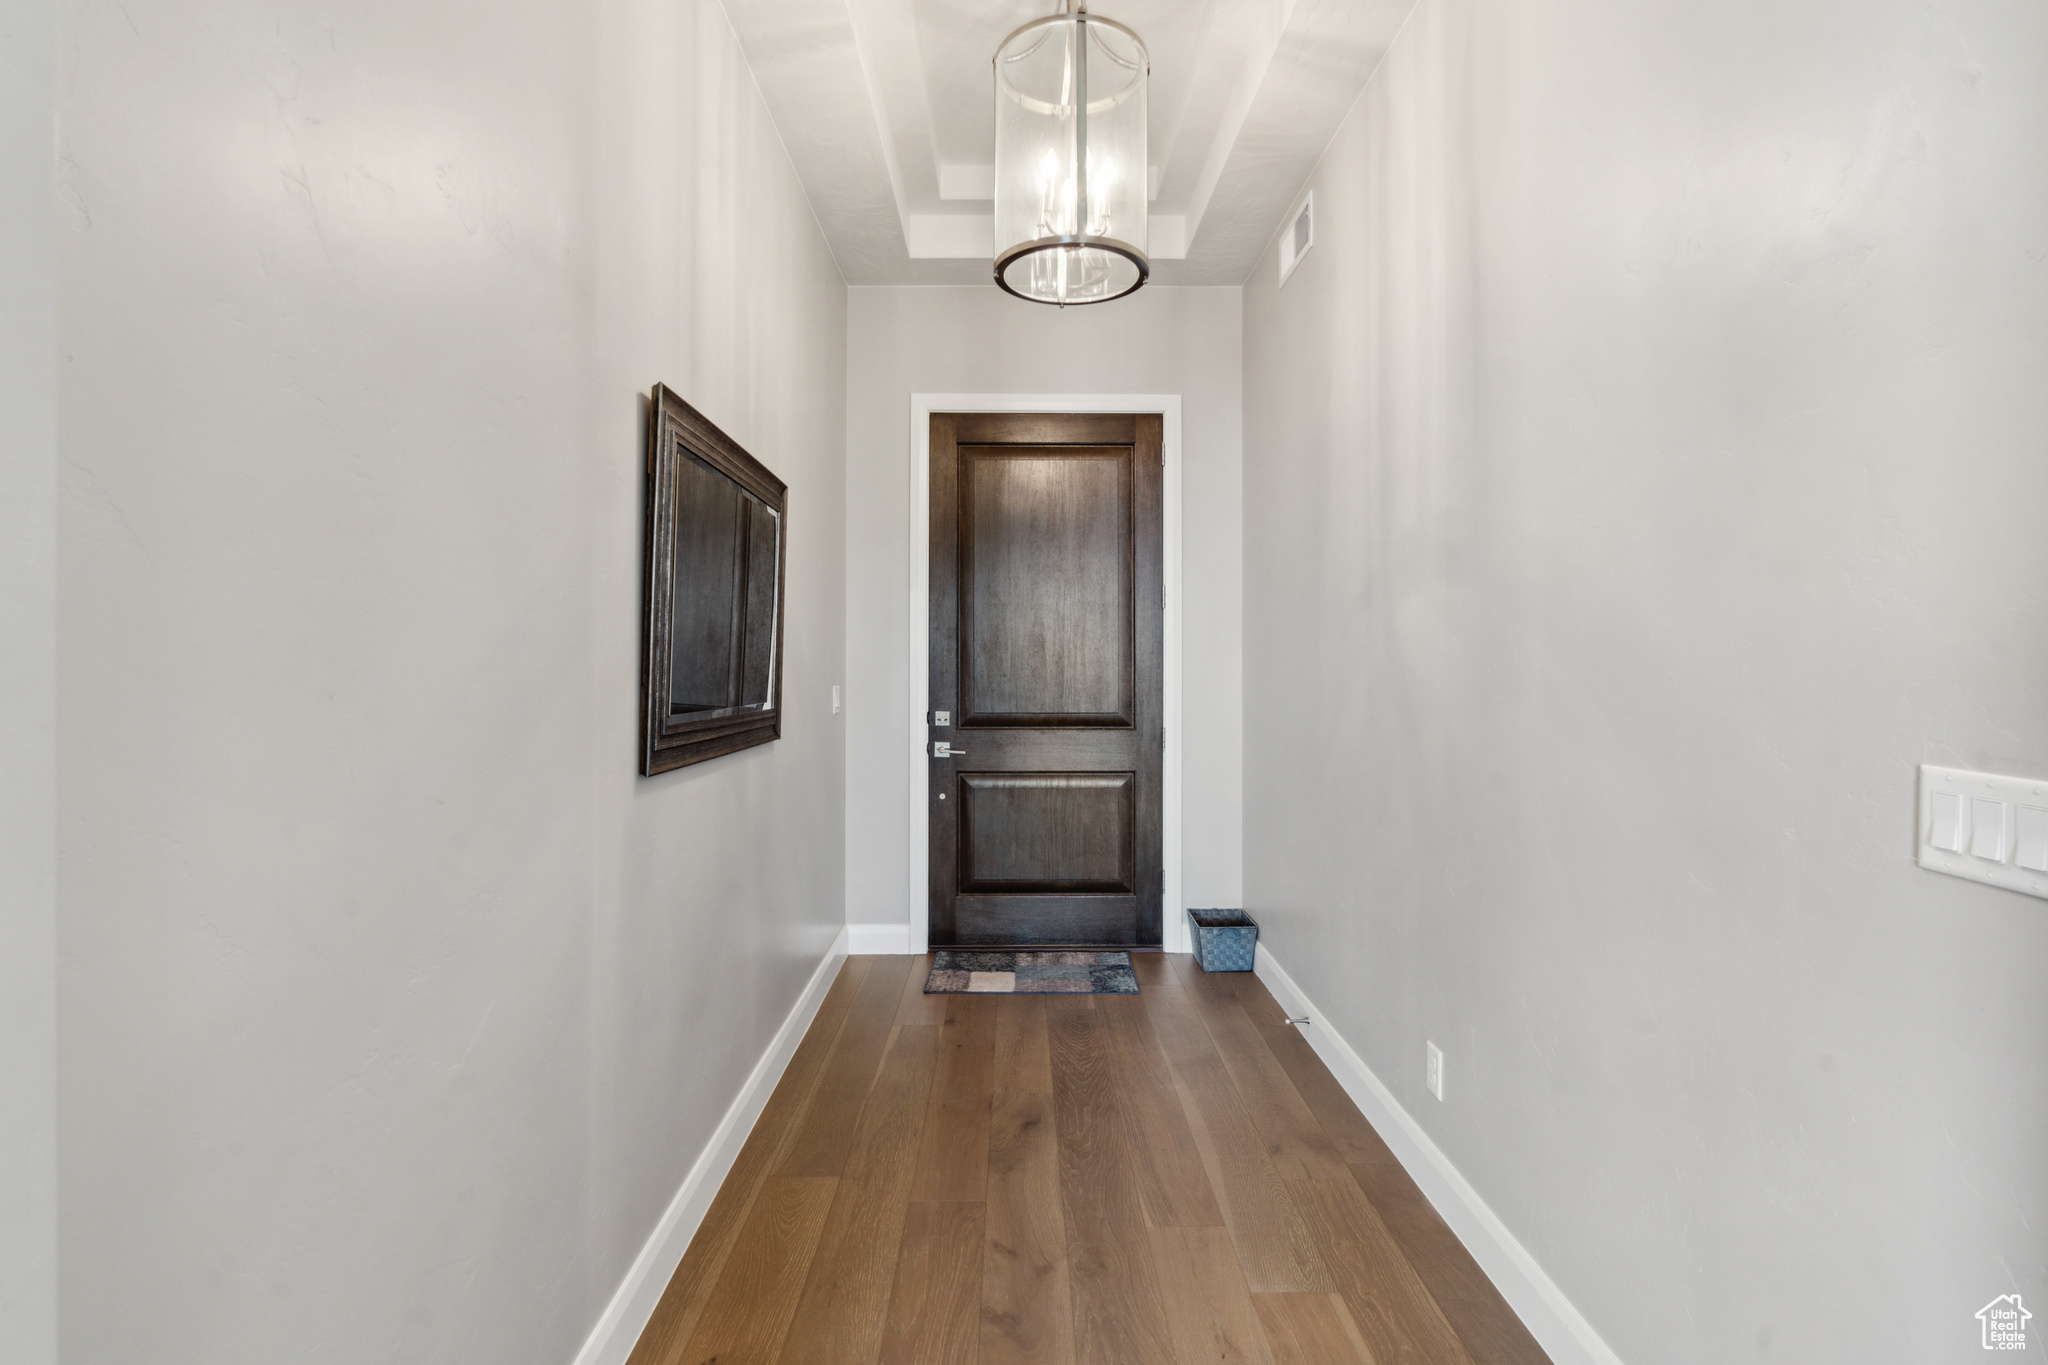 Doorway to outside with a raised ceiling, a chandelier, and hardwood / wood-style flooring